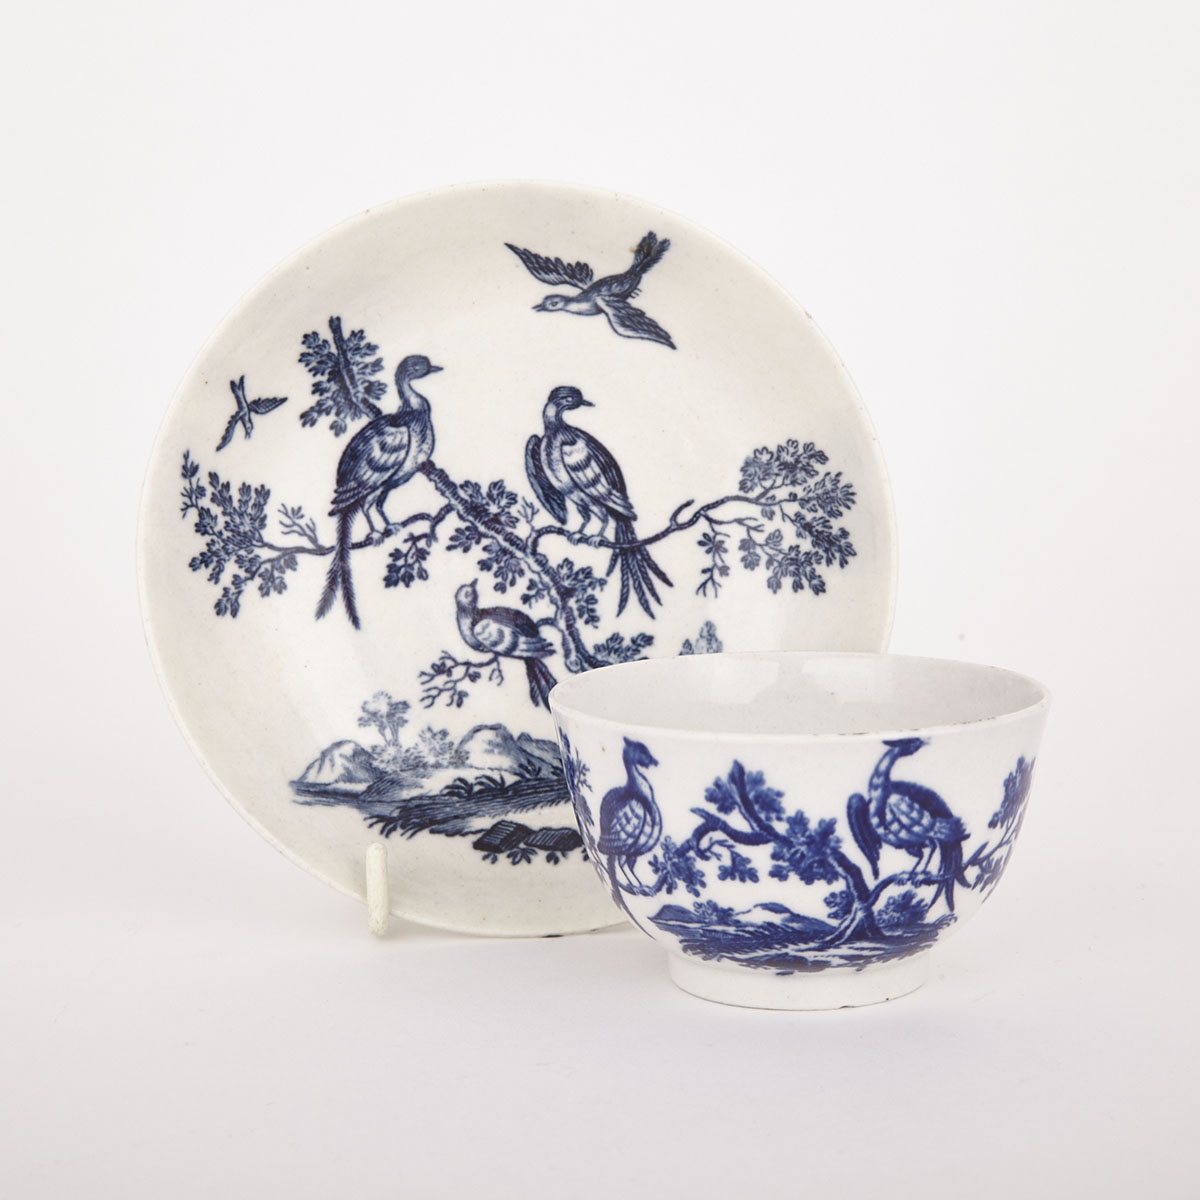 Worcester ‘Birds in Branches’ Tea Bowl and Saucer, c.1770-85